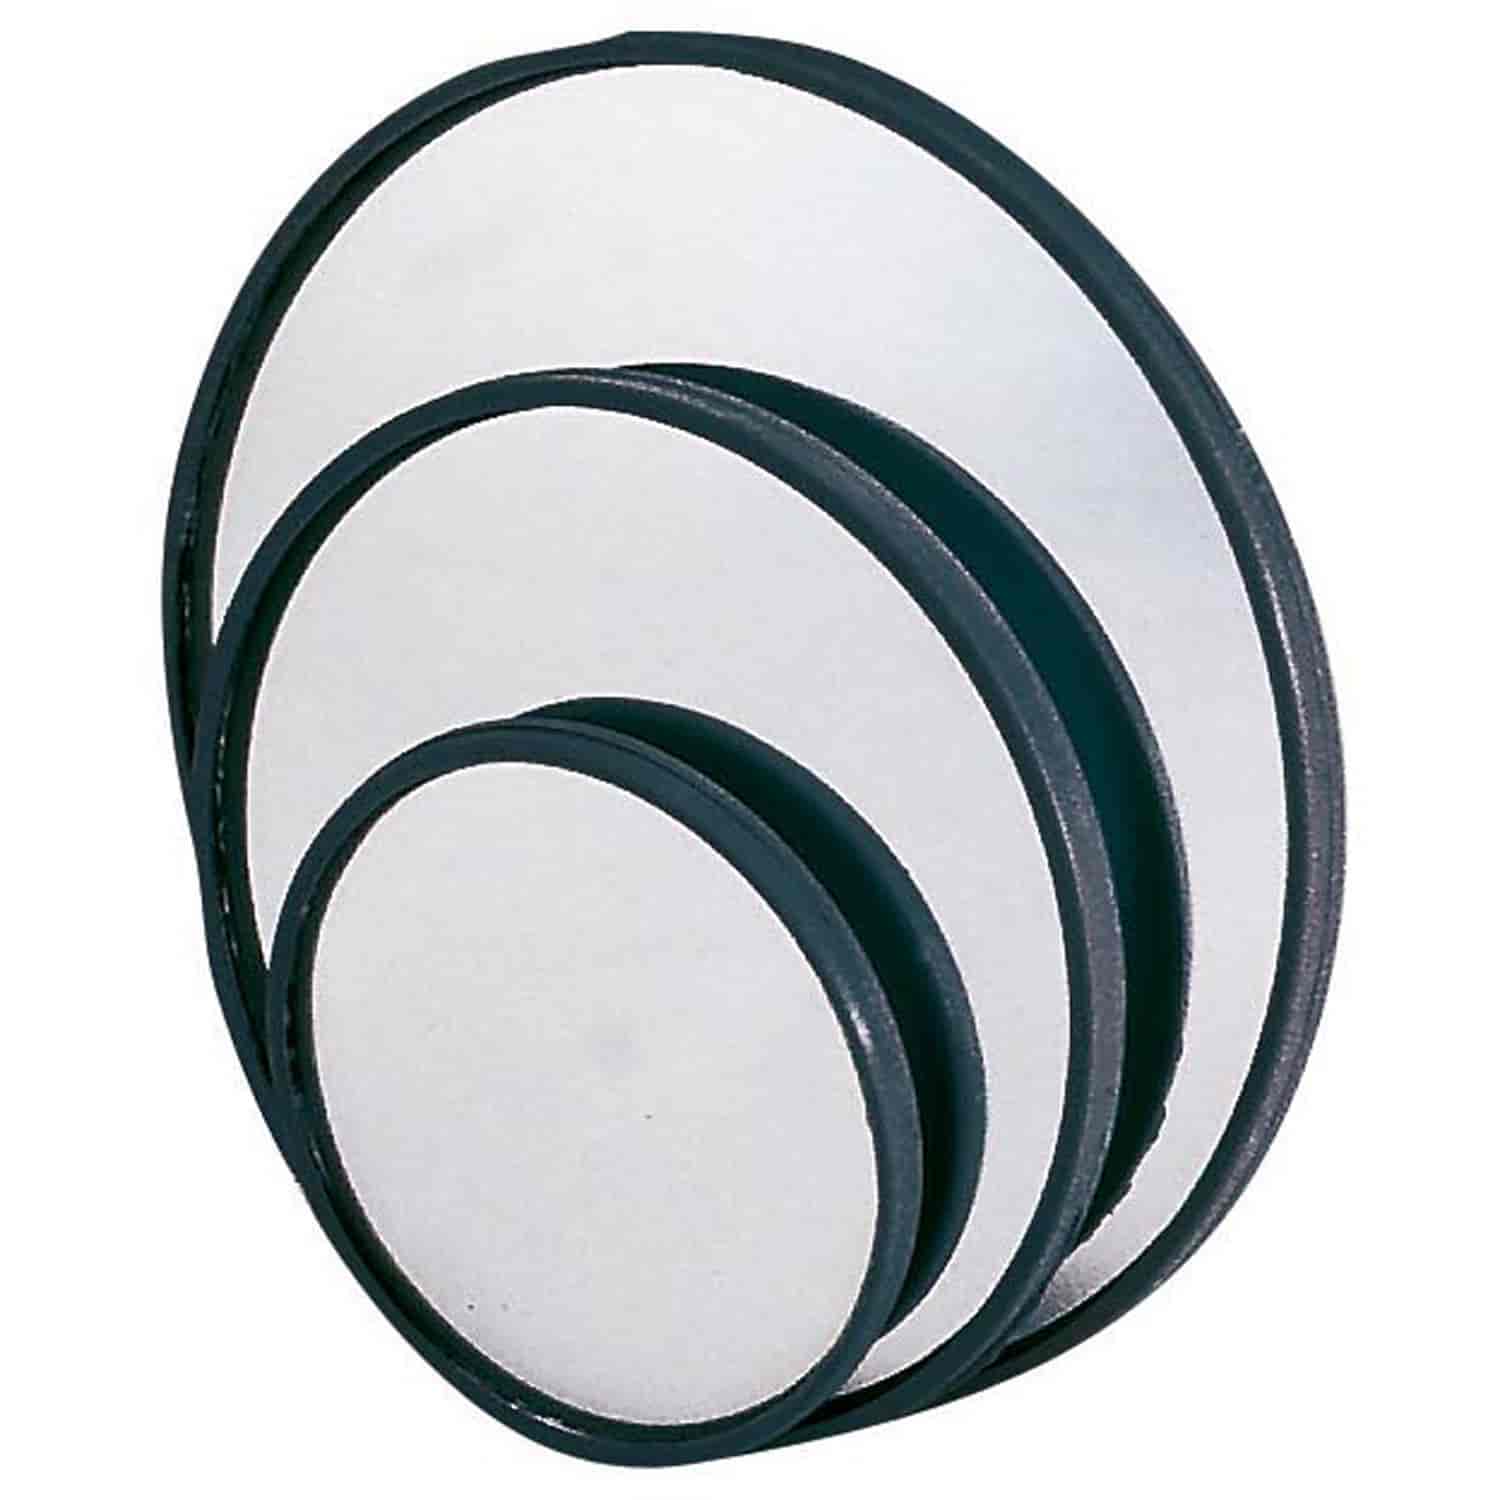 Stick-On Round Mirror This mirror is 3 inches